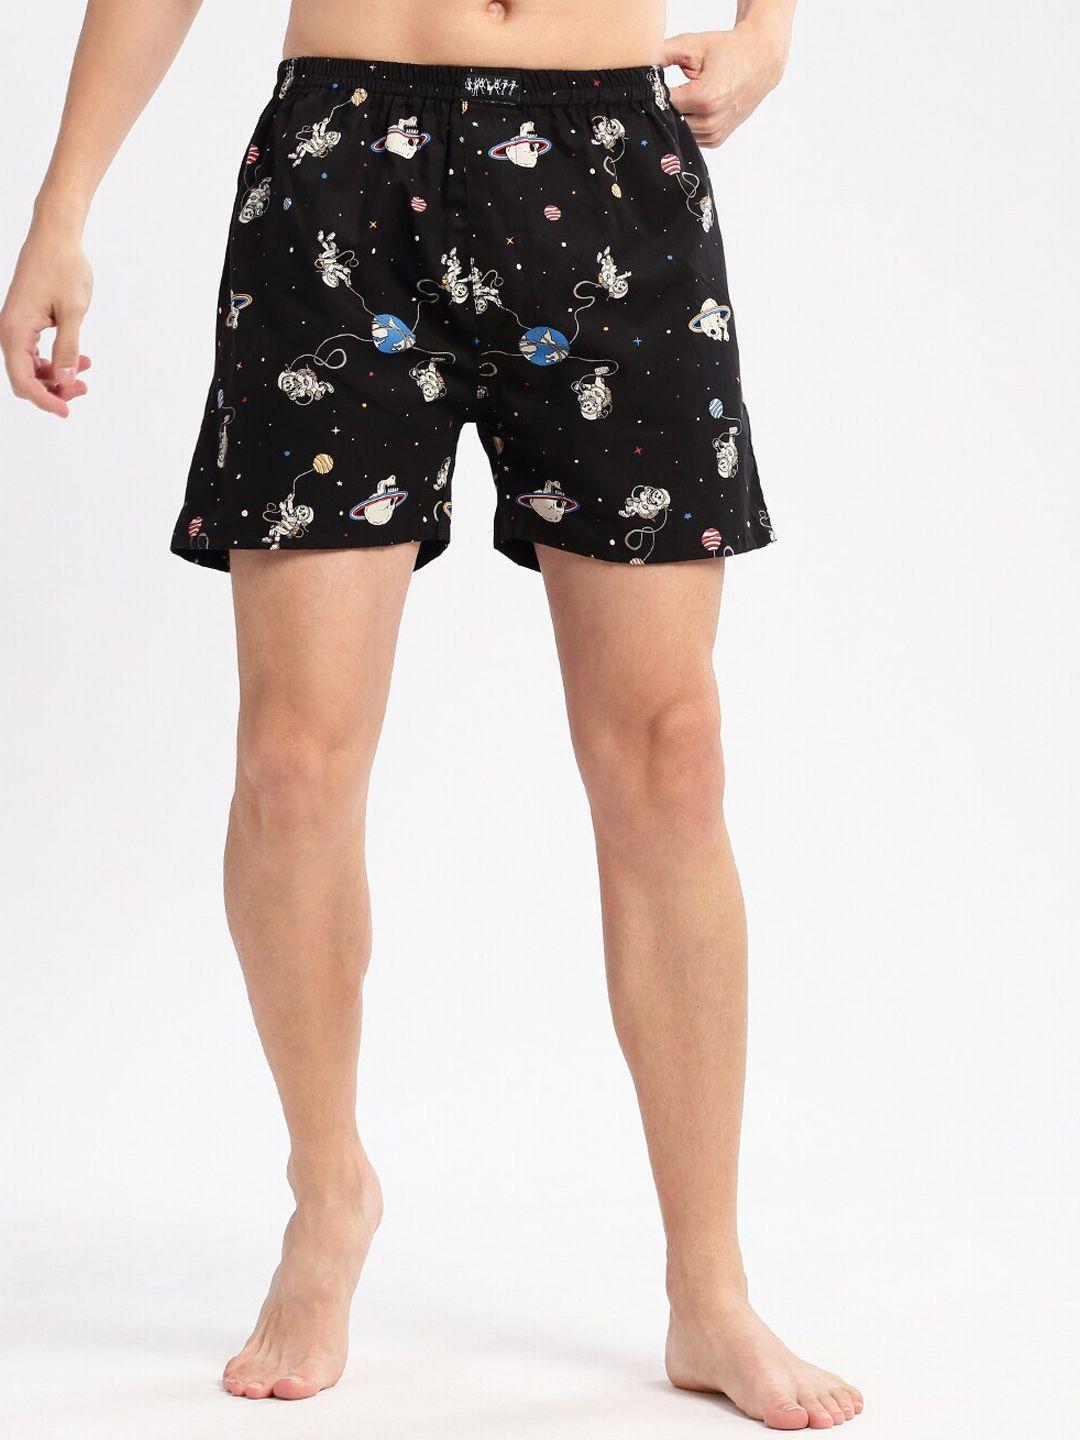 showoff-space-printed-cotton-boxers-am-141-19